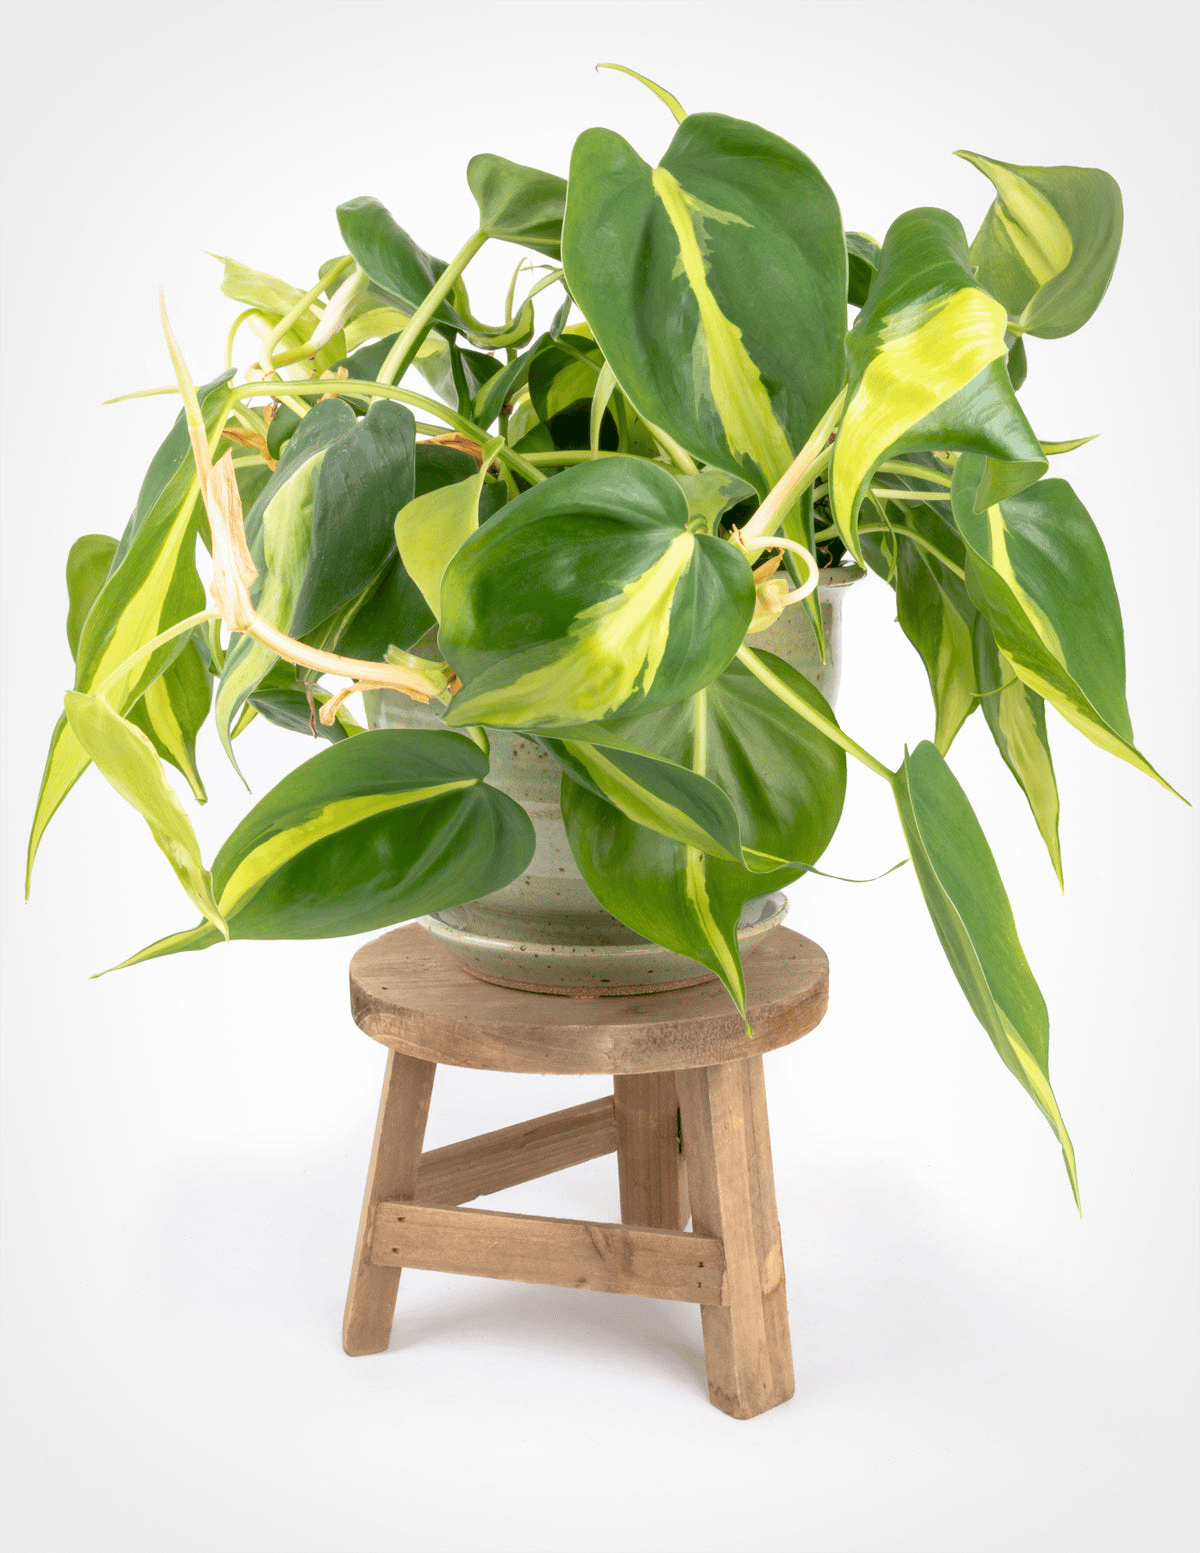 Is Philodendron Hederaceum rare?